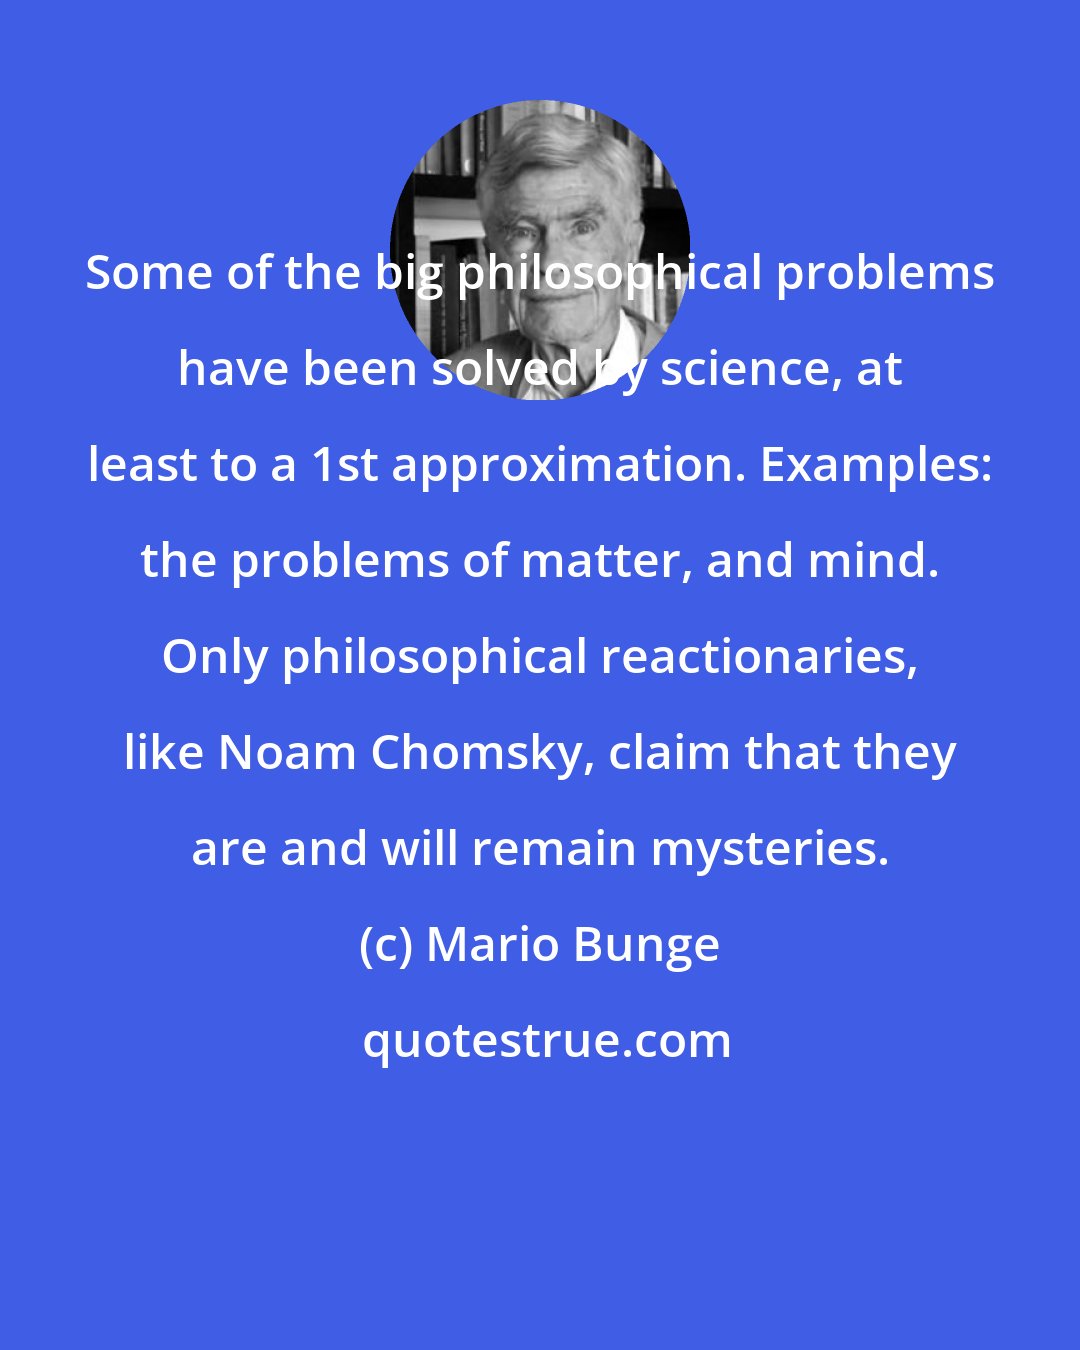 Mario Bunge: Some of the big philosophical problems have been solved by science, at least to a 1st approximation. Examples: the problems of matter, and mind. Only philosophical reactionaries, like Noam Chomsky, claim that they are and will remain mysteries.